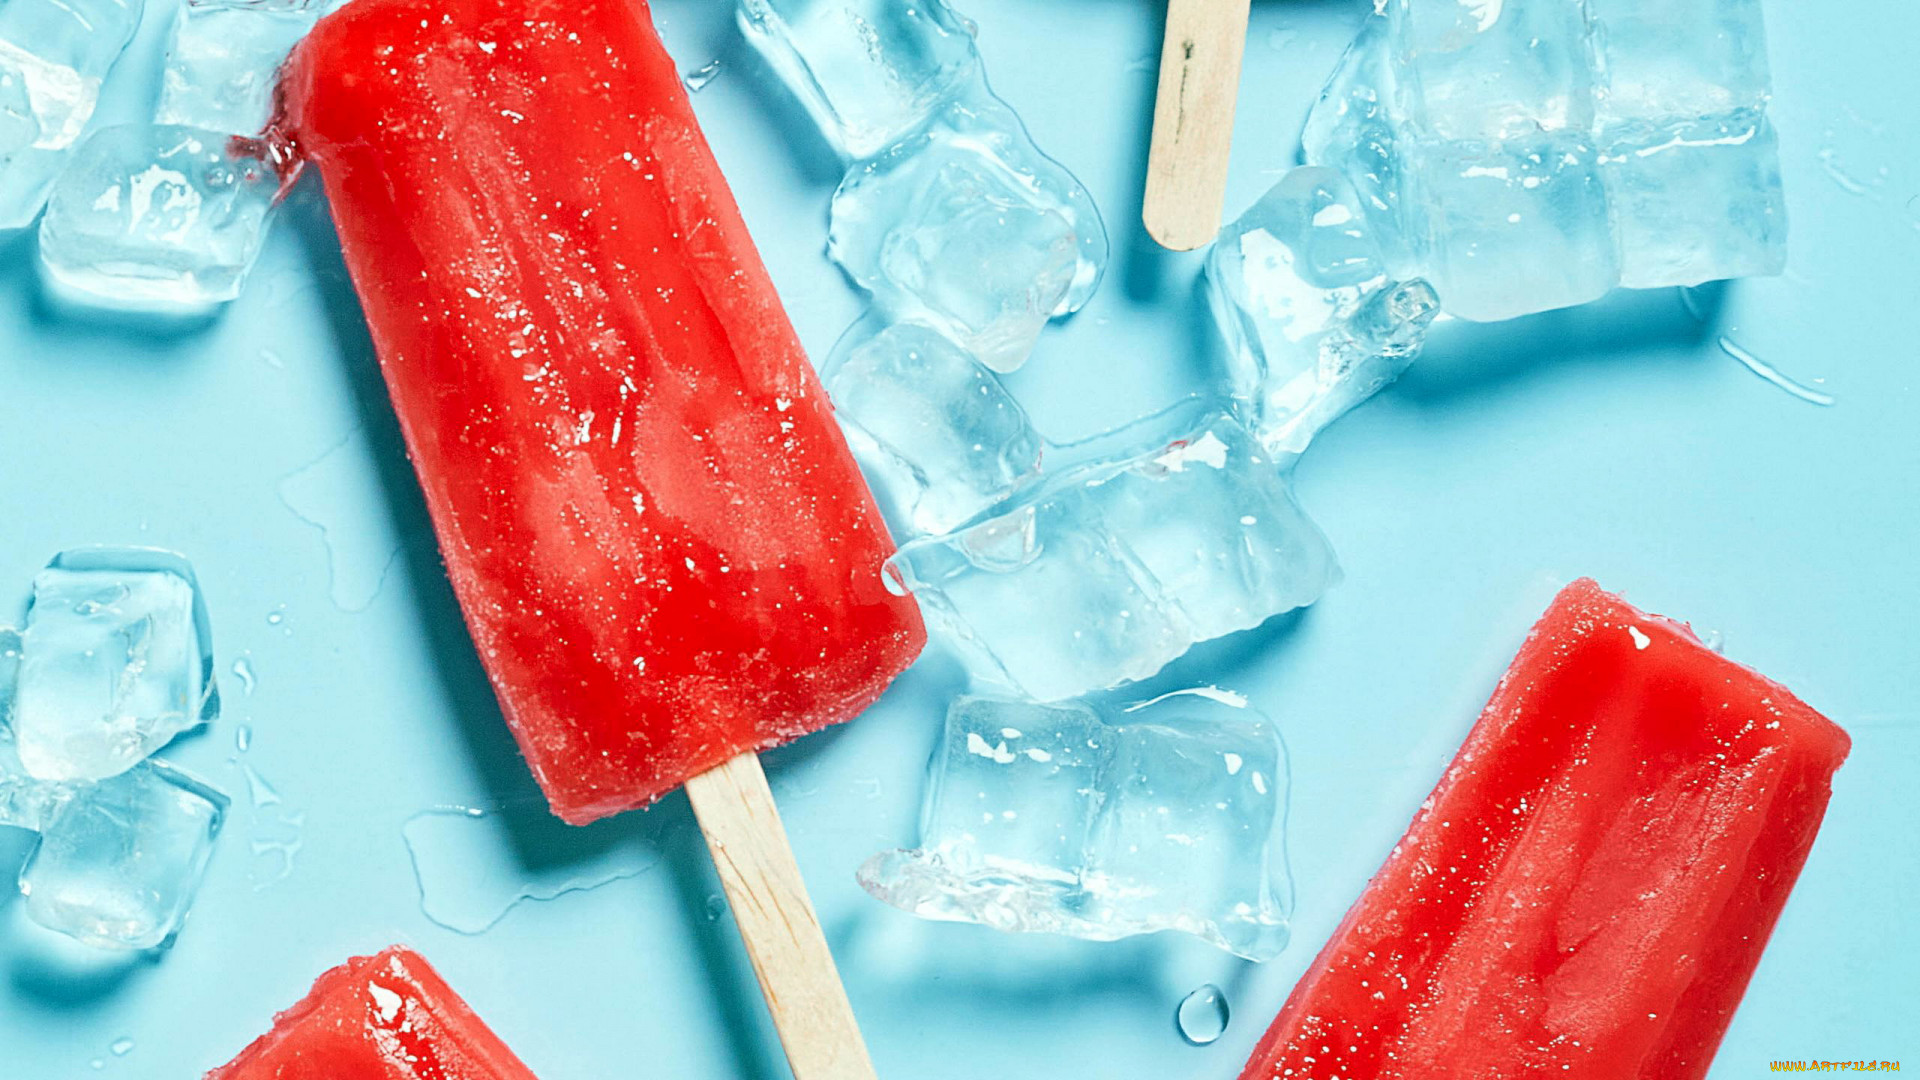 Food Sweets Ice Cubes Popsicle 1920x1080